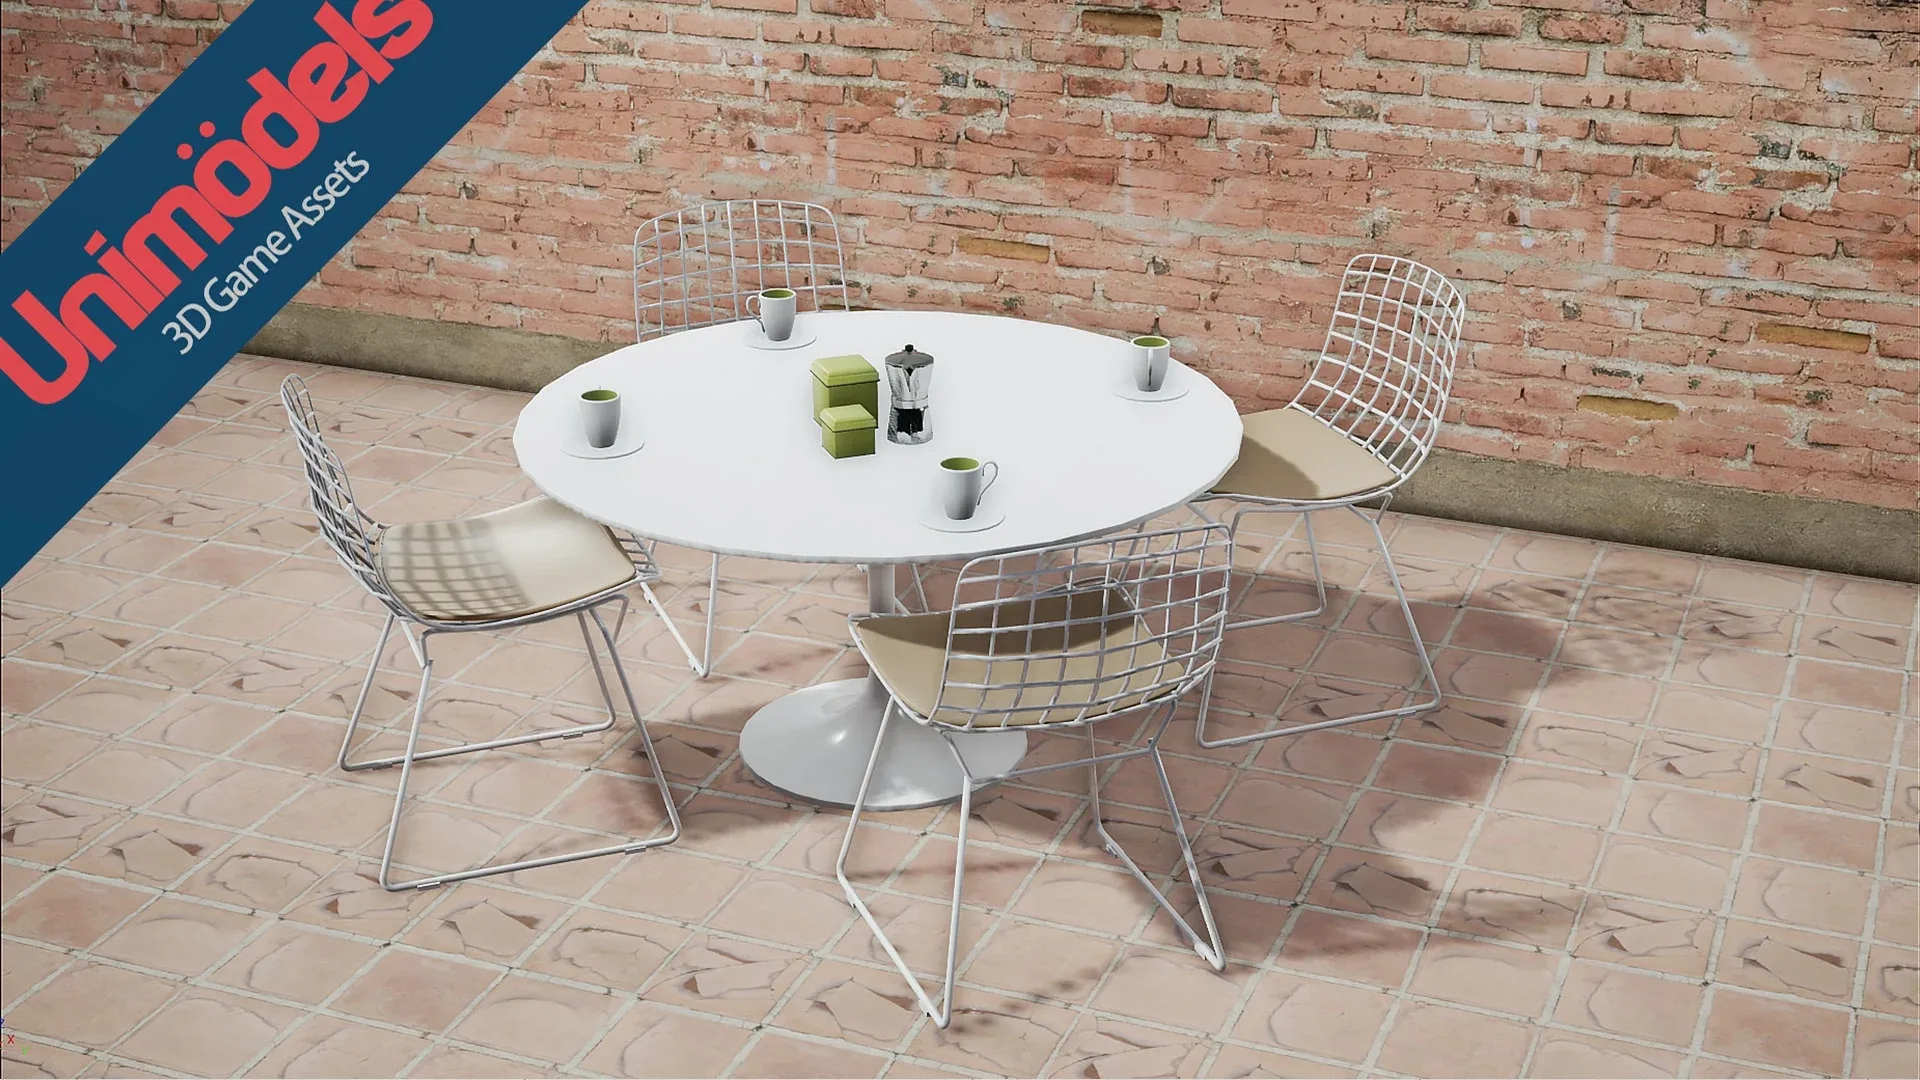 Unimodels Exterior Tables & Chairs Vol. 1 for UE4